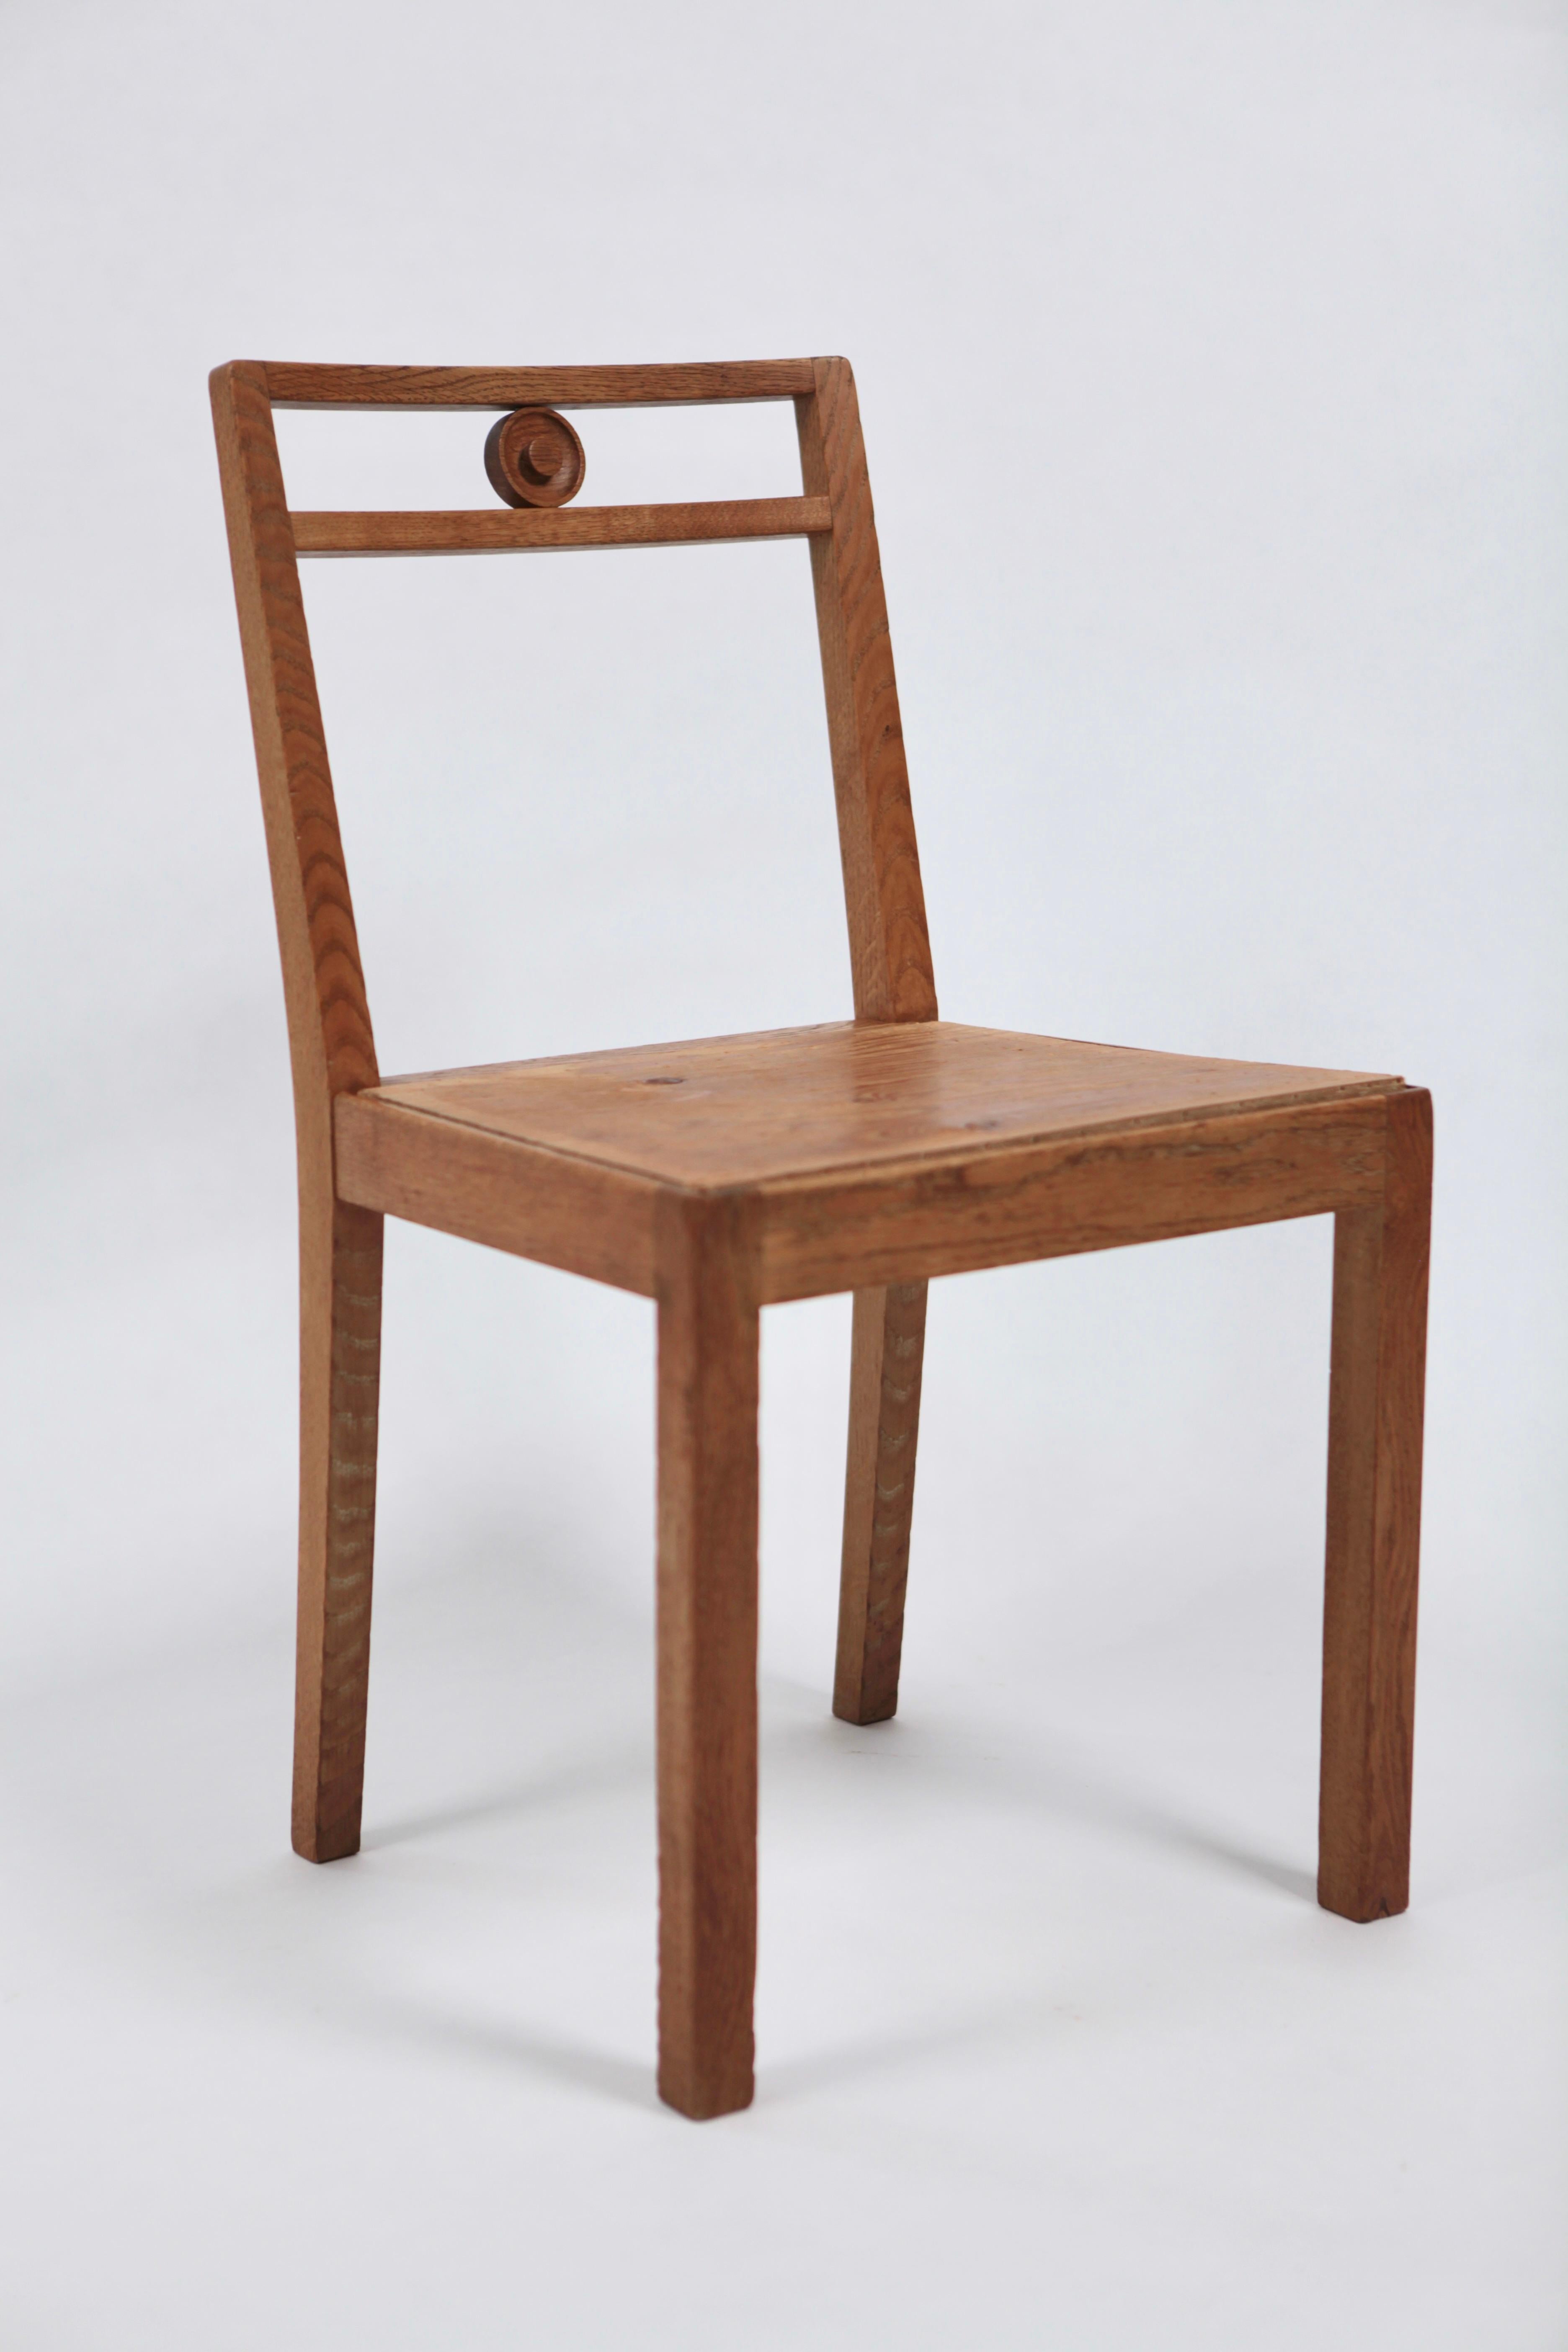 A 'Dagmar' chair by Axel Einar Hjorth, designed in 1935, this model is executed in 1938, by Nordiska Kompaniet.
Cerused oak and plywood.
Label marked NK R 38719-C7 12 -38.
Beautiful original vintage condition, and a great example of Hjorth´s